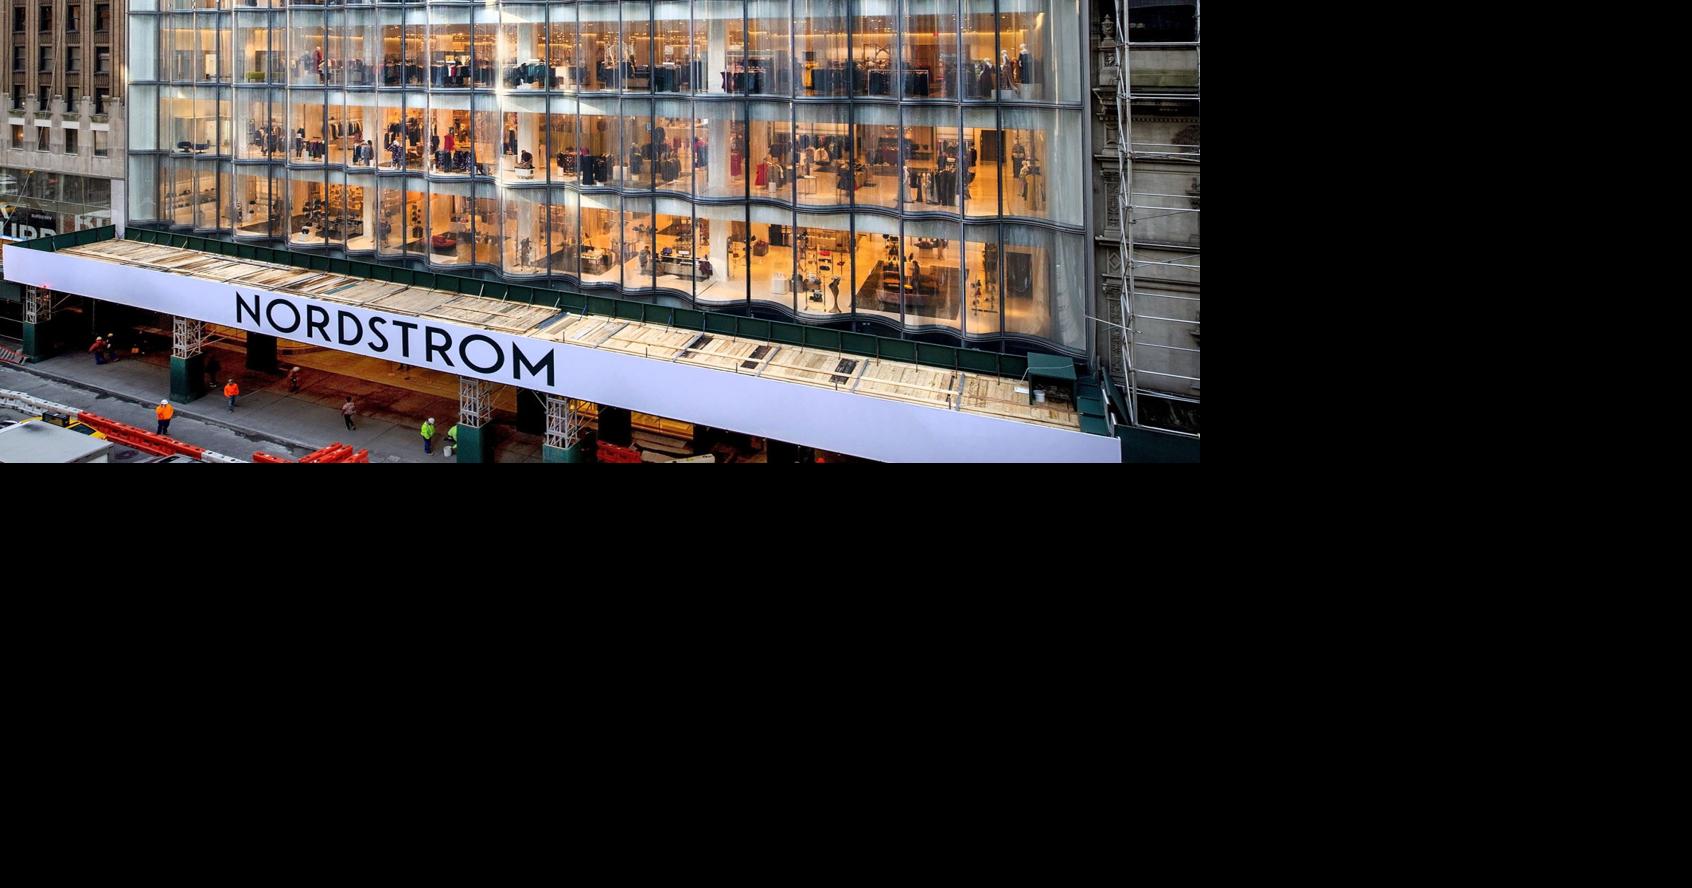 Nordstrom Flagship Store, Seattle